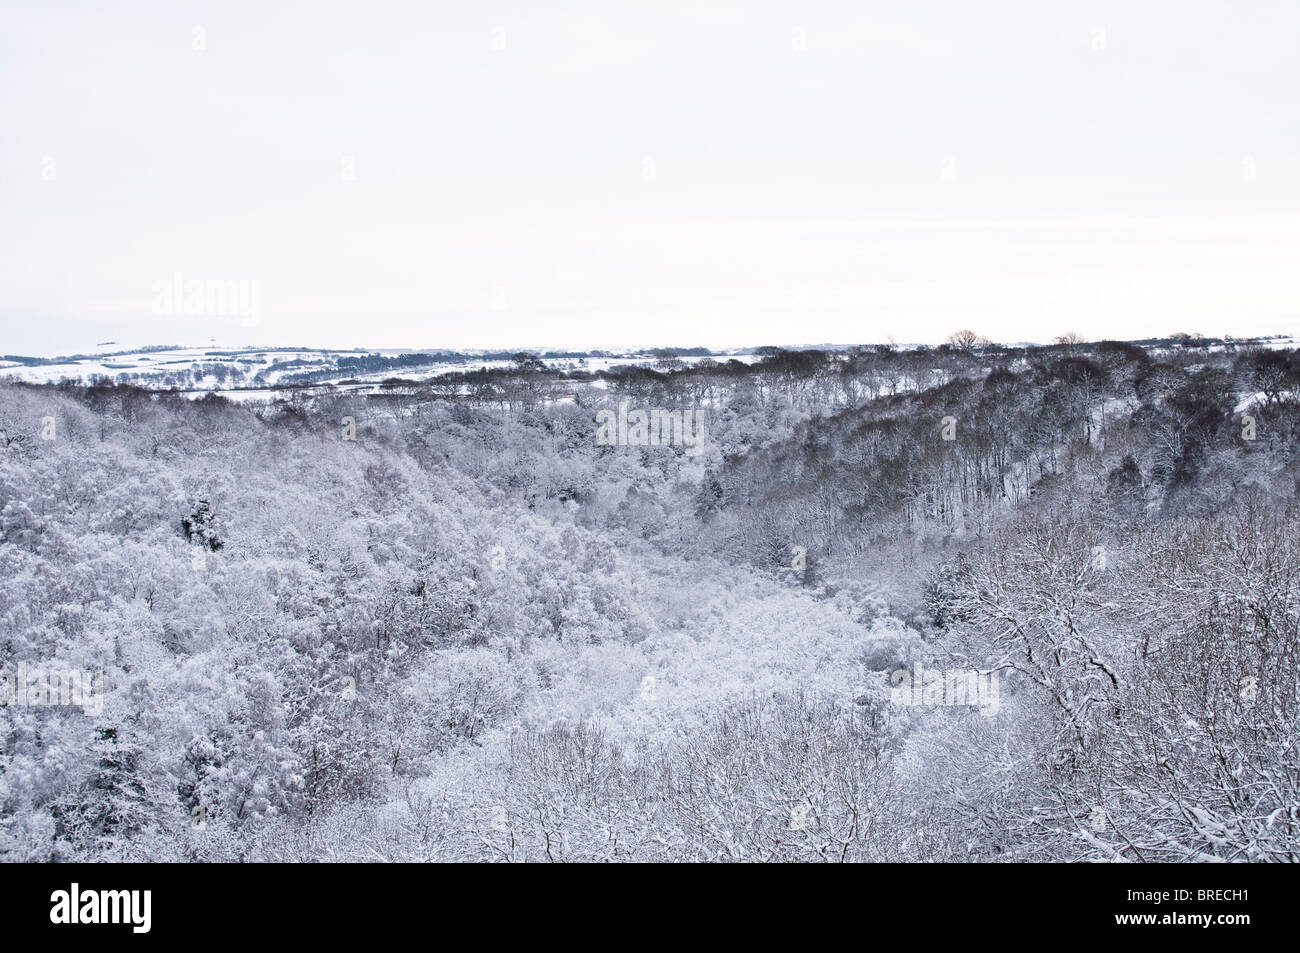 Snowy landscape view over a densely wooded valley, looking South East from Hownsgill Viaduct, near Moorside, County Durham, UK. Stock Photo